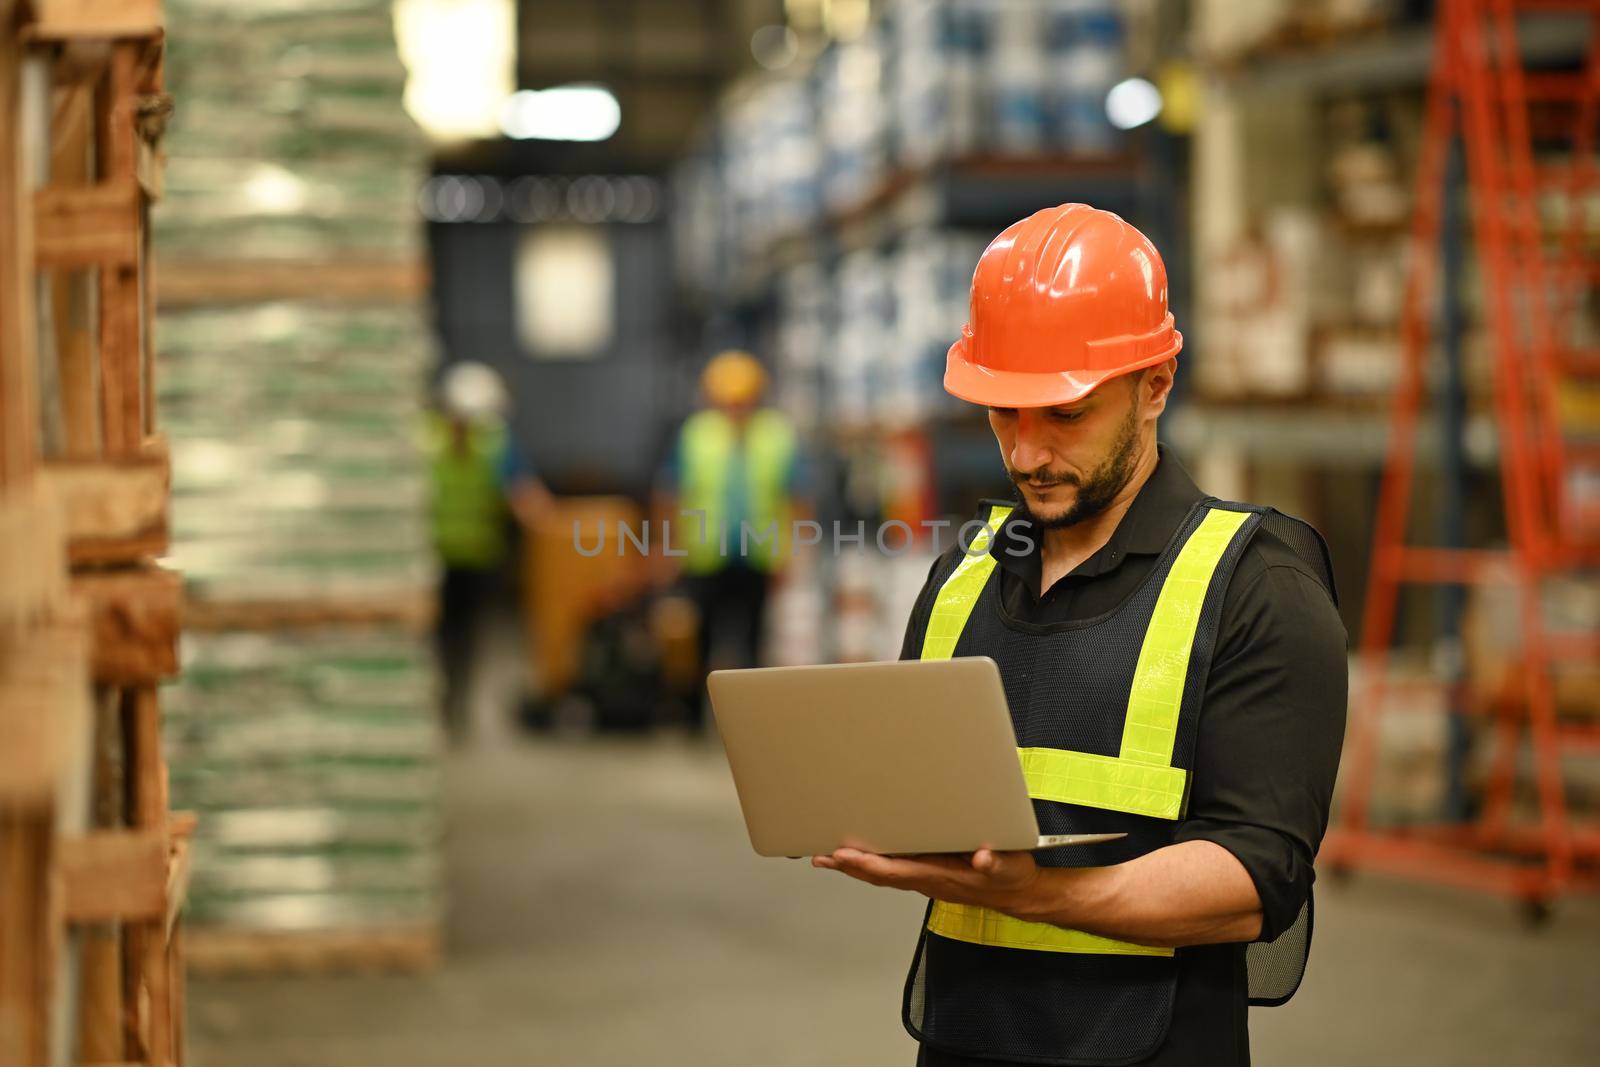 Warehouse manager wearing hardhats and reflective jackets using laptop for checking stock and order details in warehouse.